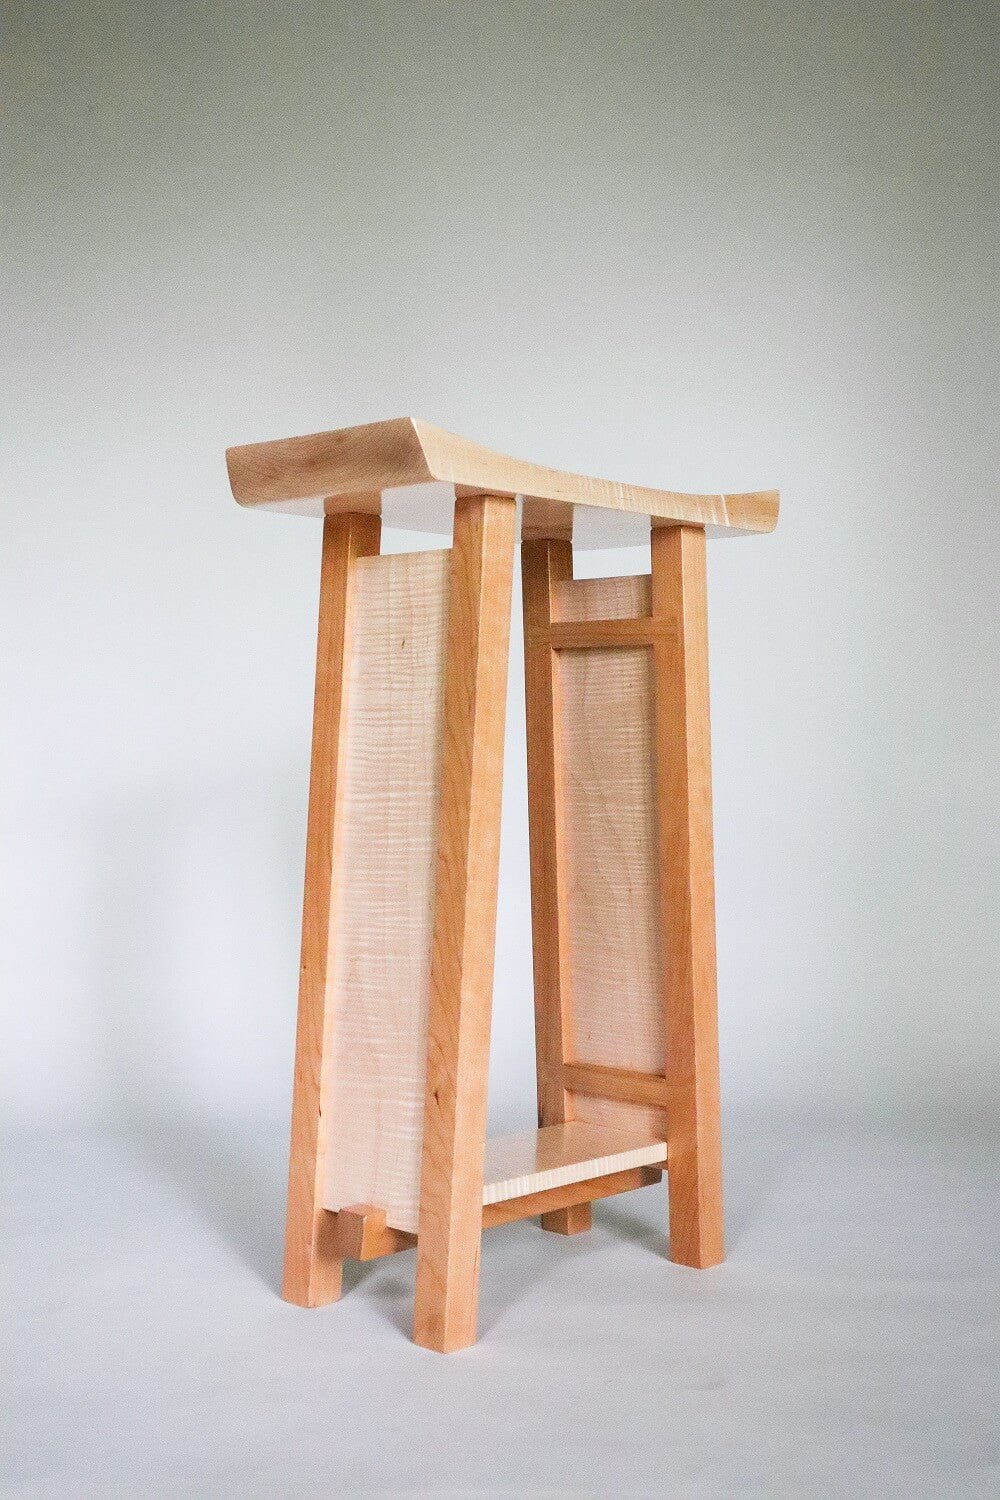 The Shaped Side Table in tiger maple and cherry - narrow tables by Mokuzai Furniture